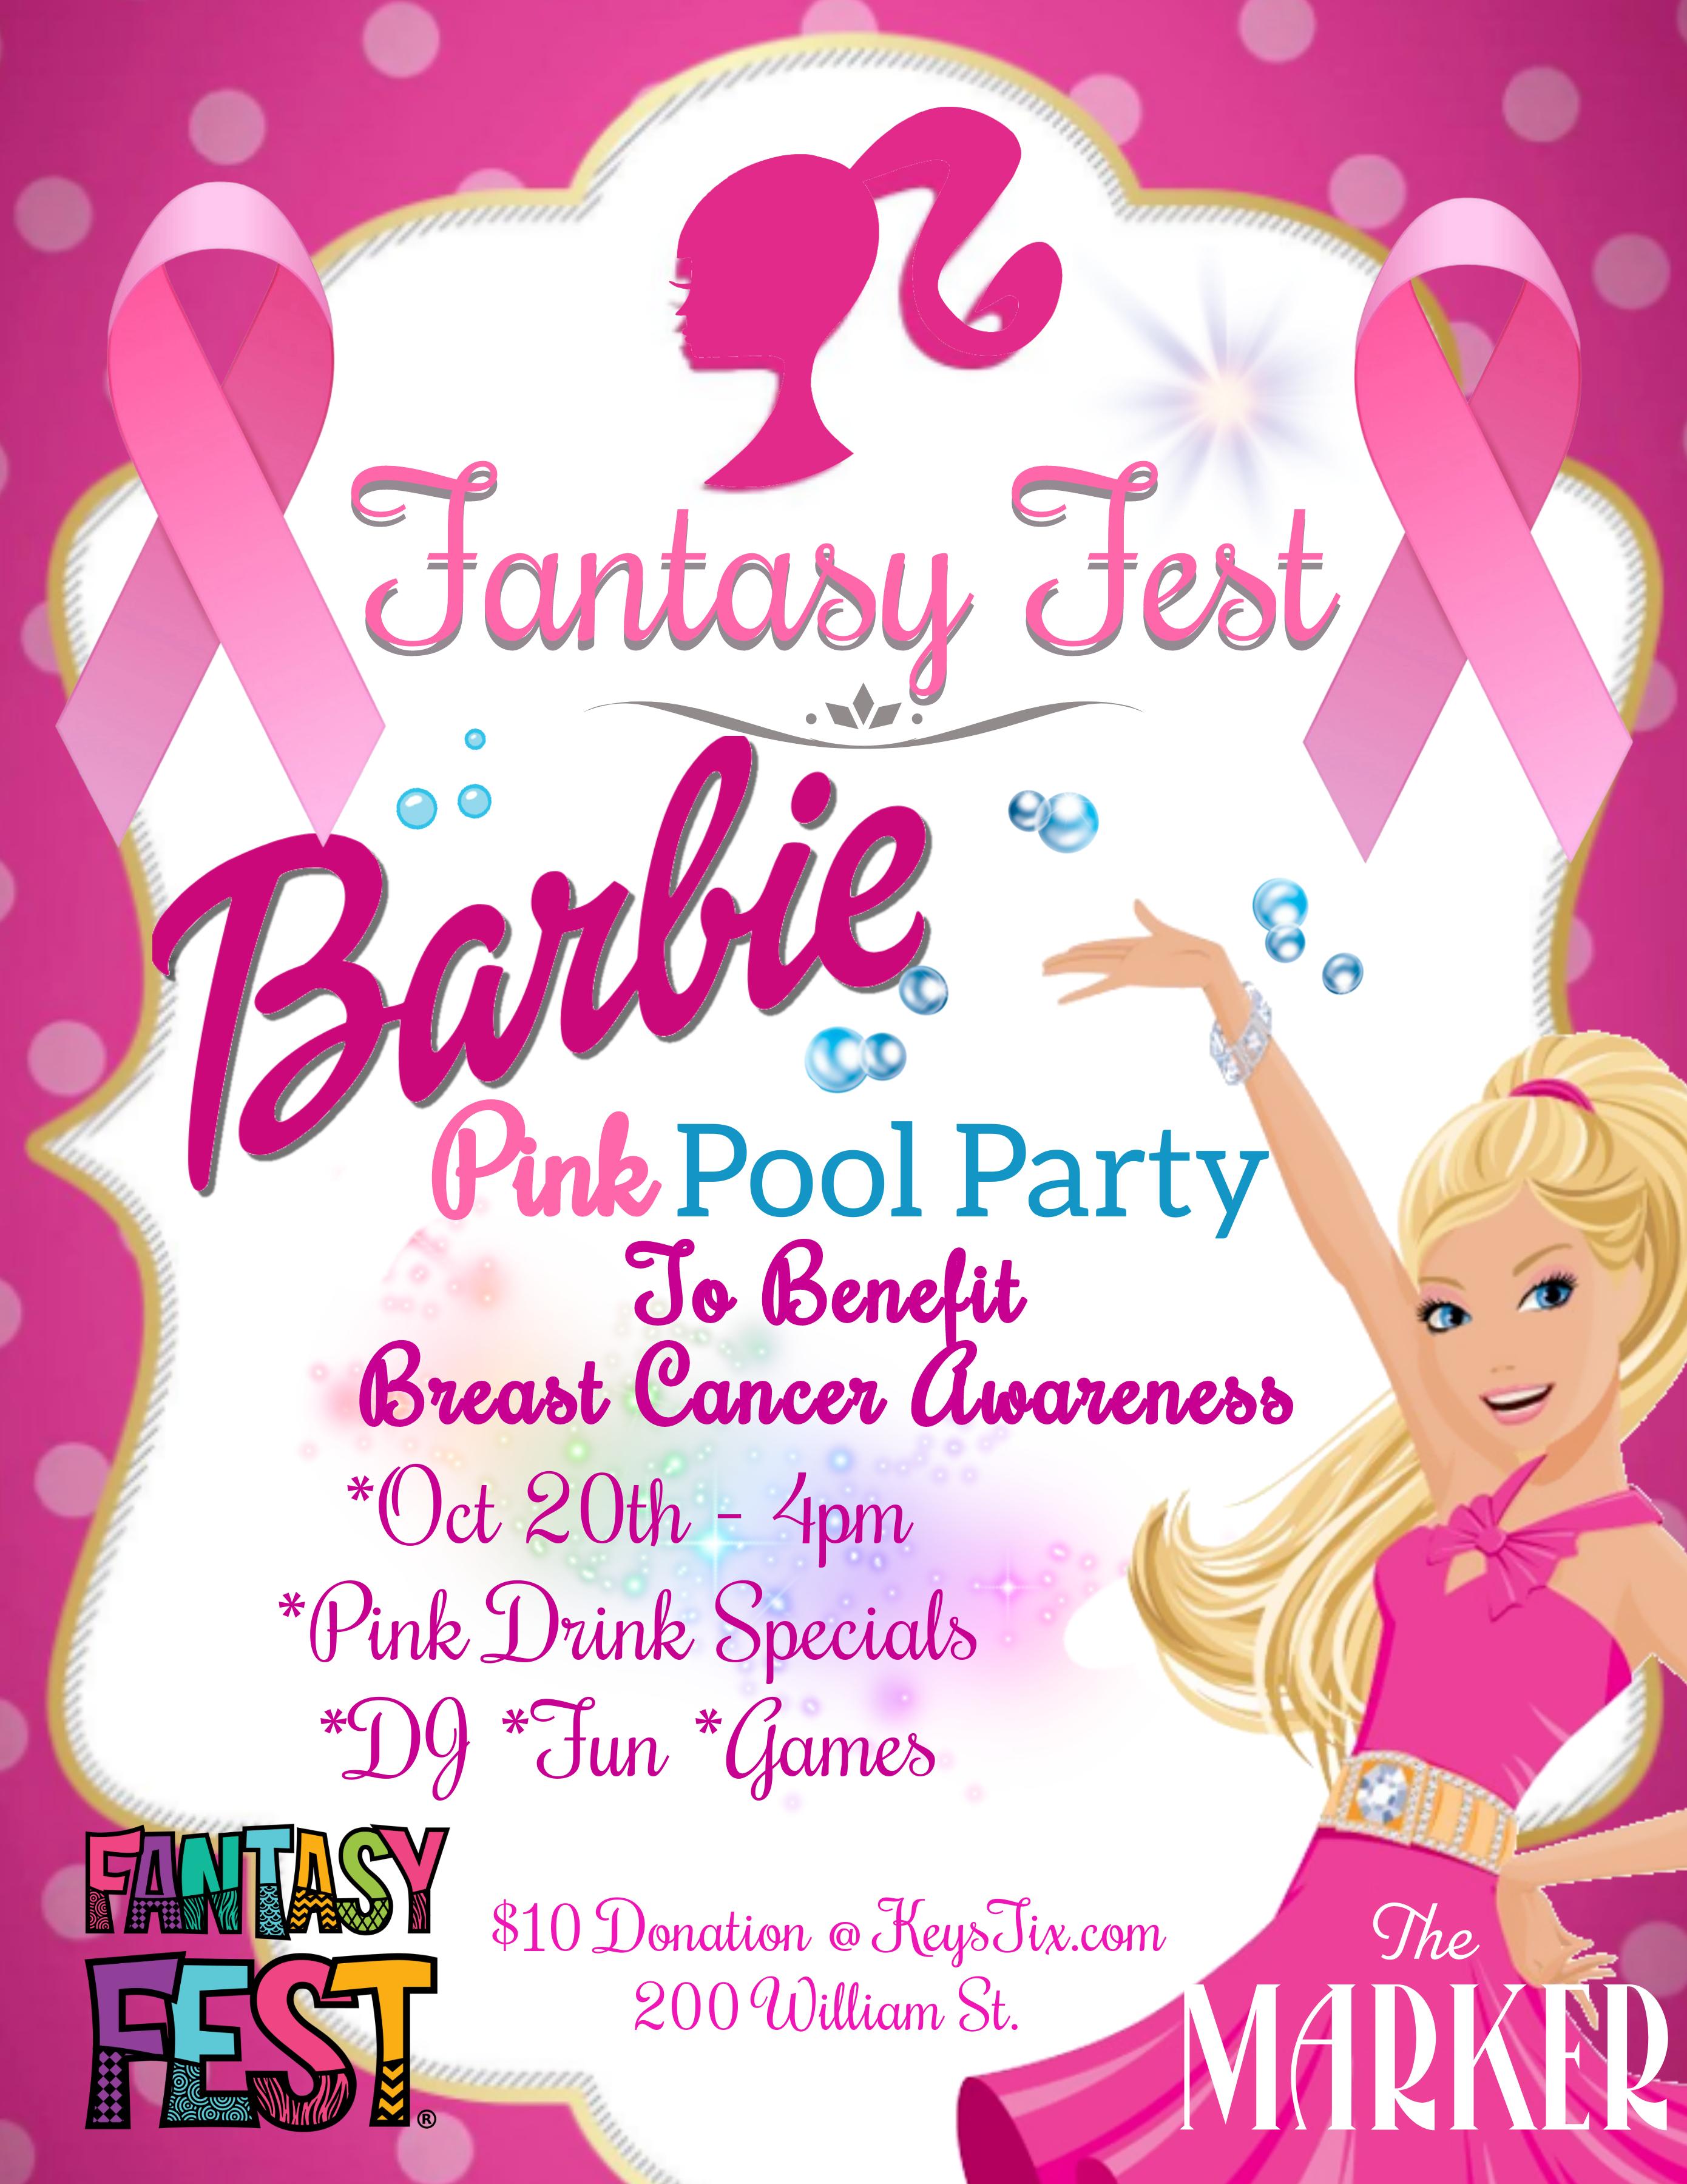 Barbie’s Pink Pool Party at The Marker Key West